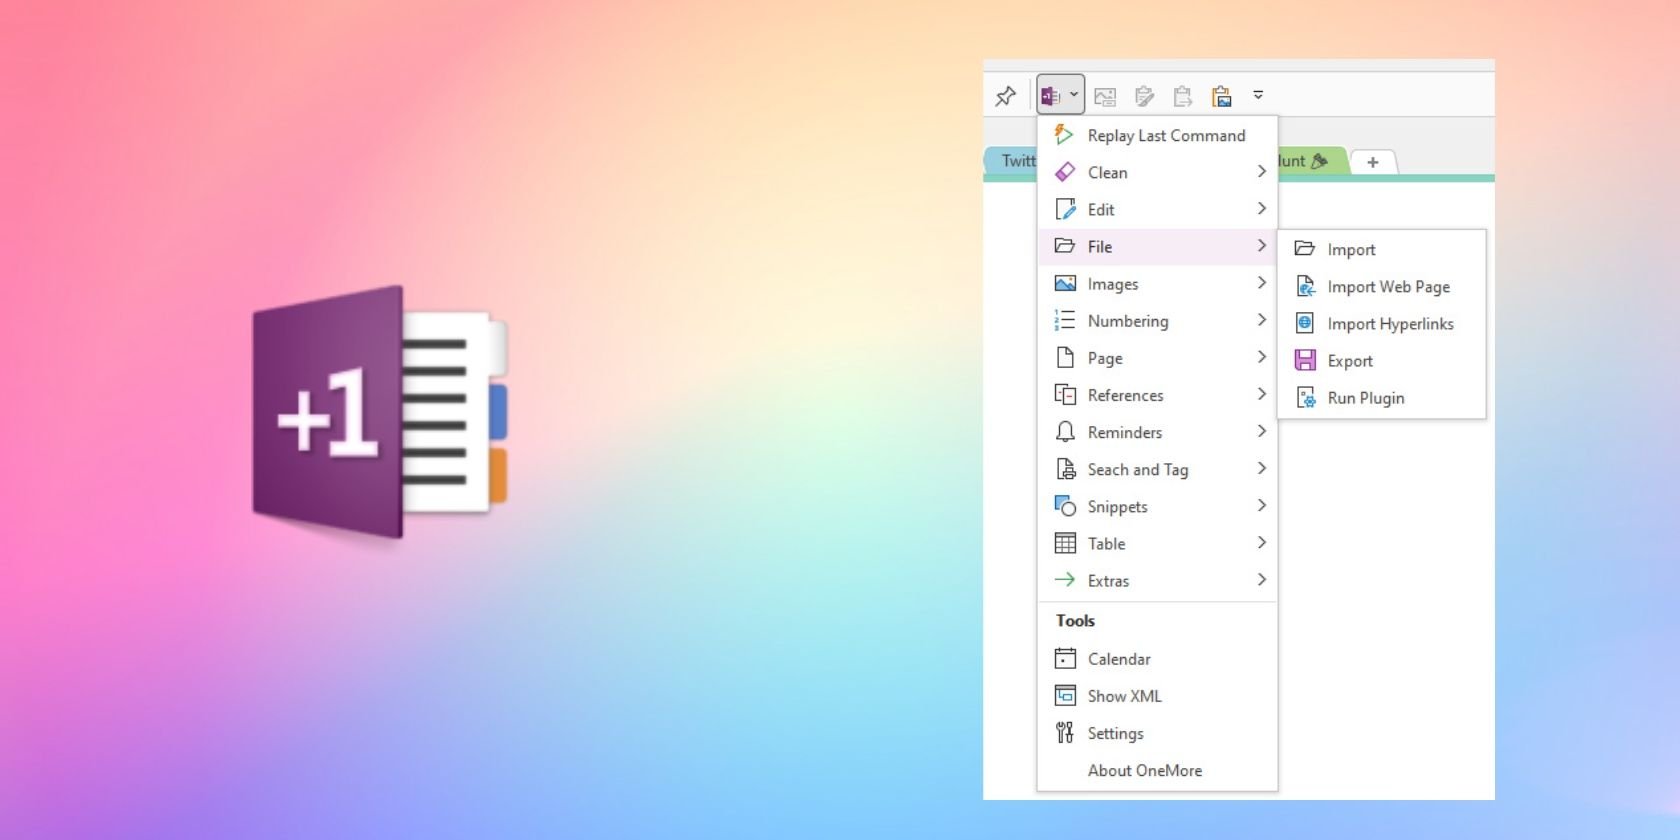 41 Ways to Get More Out of OneNote